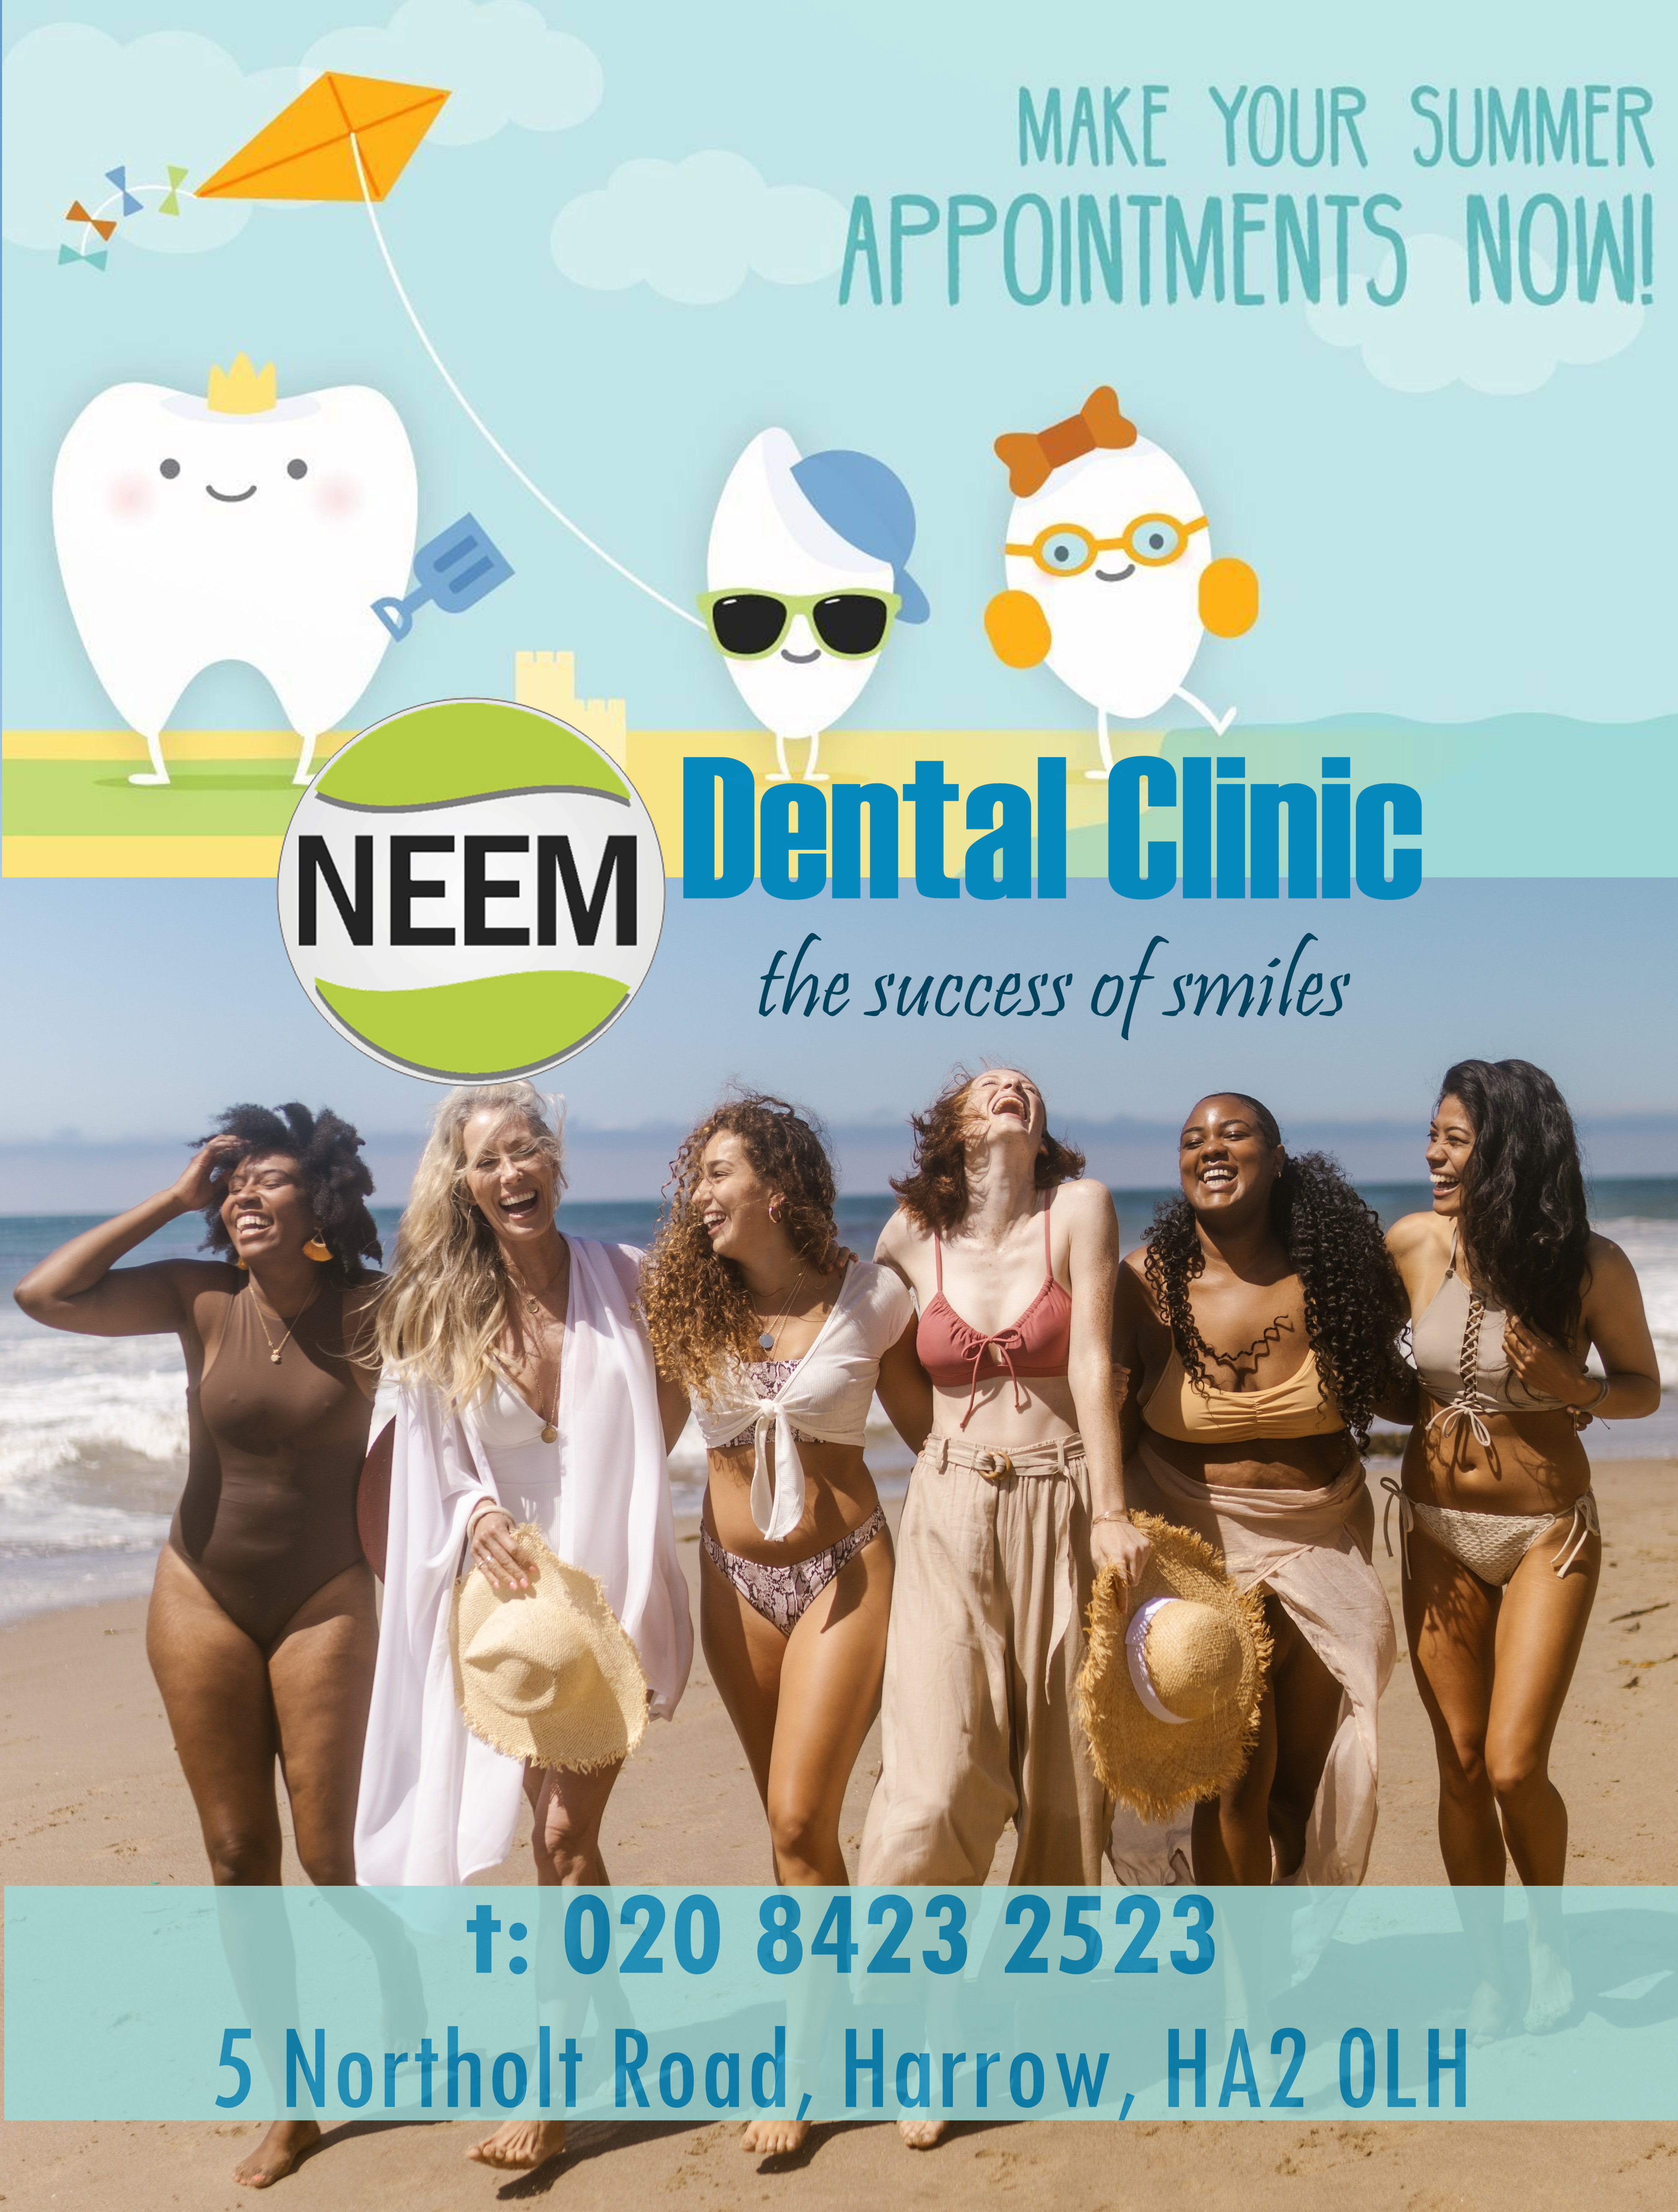 Don’t Forget to Schedule Your Summer Dental Appointments